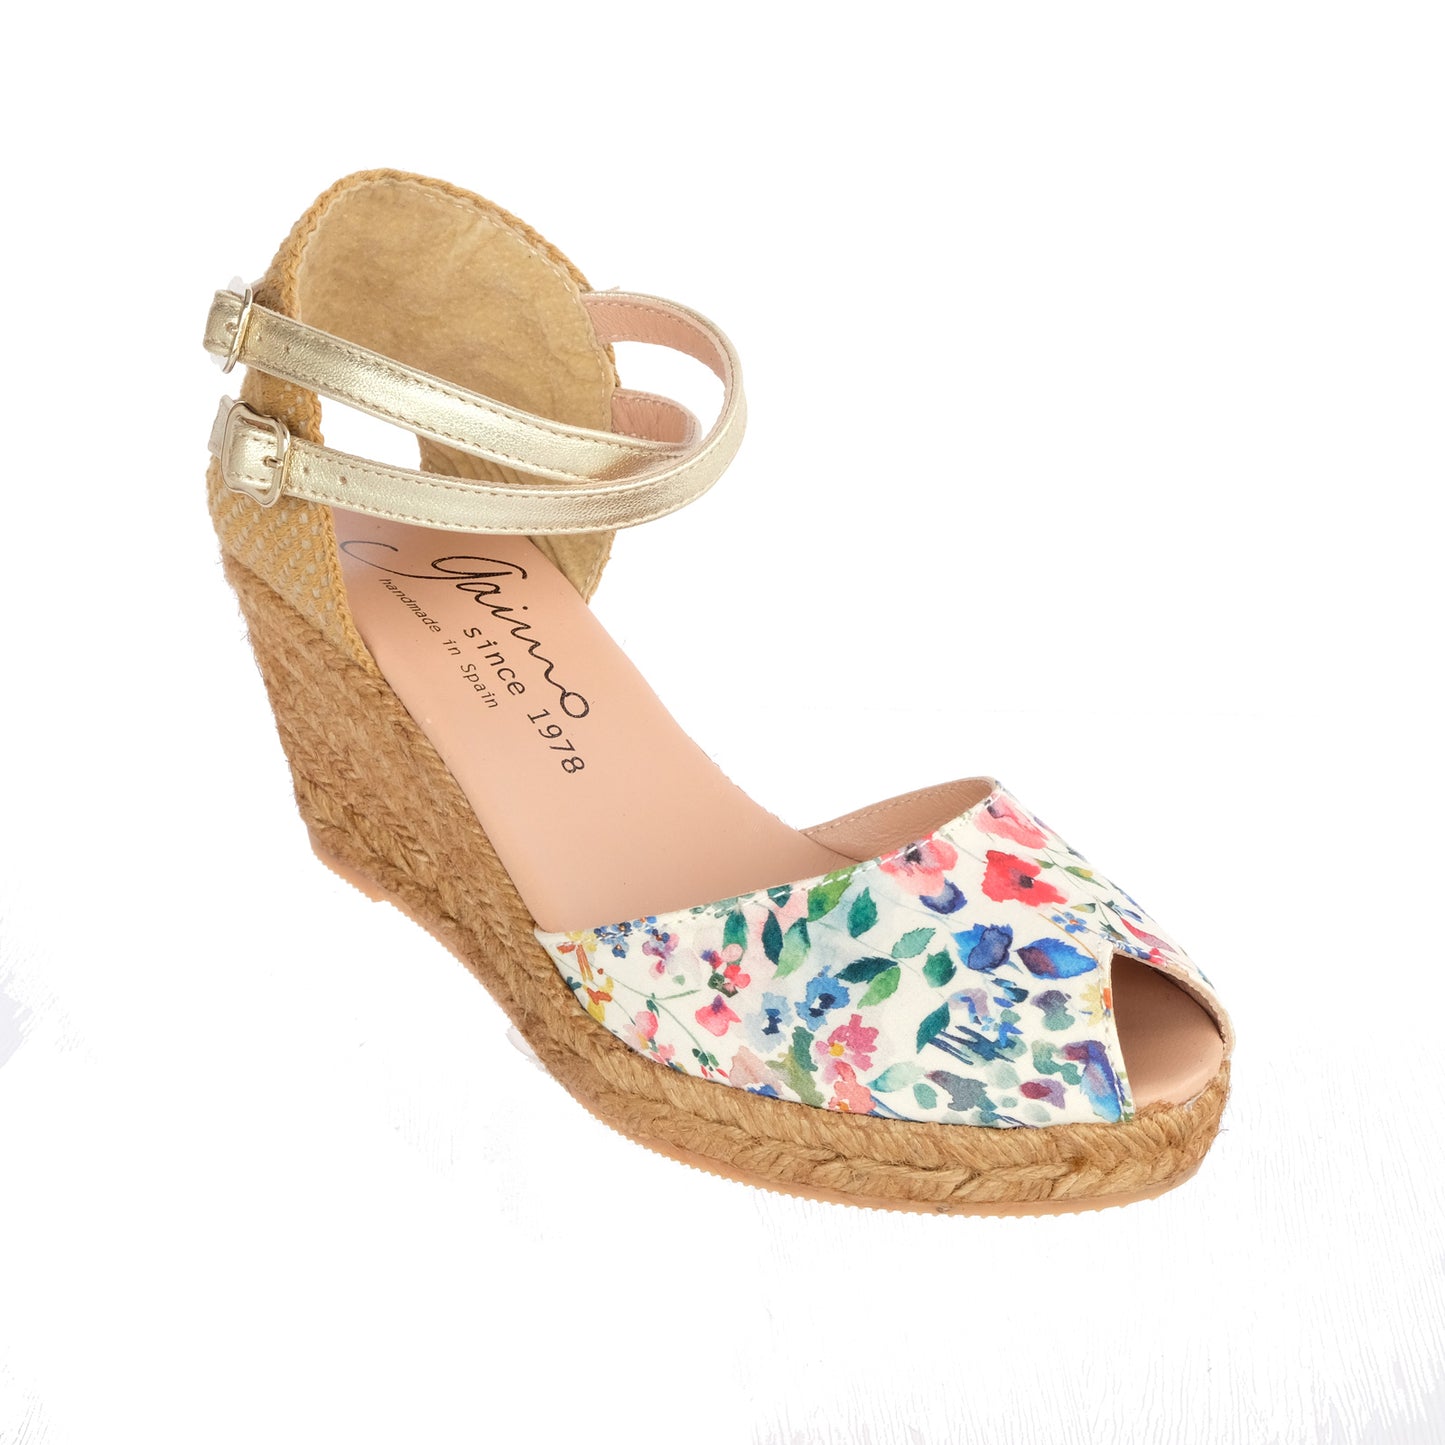 JUDY LIBERTY wedges - Elizabeth Little and Badt and Co. Limited Collection - Badt and Co